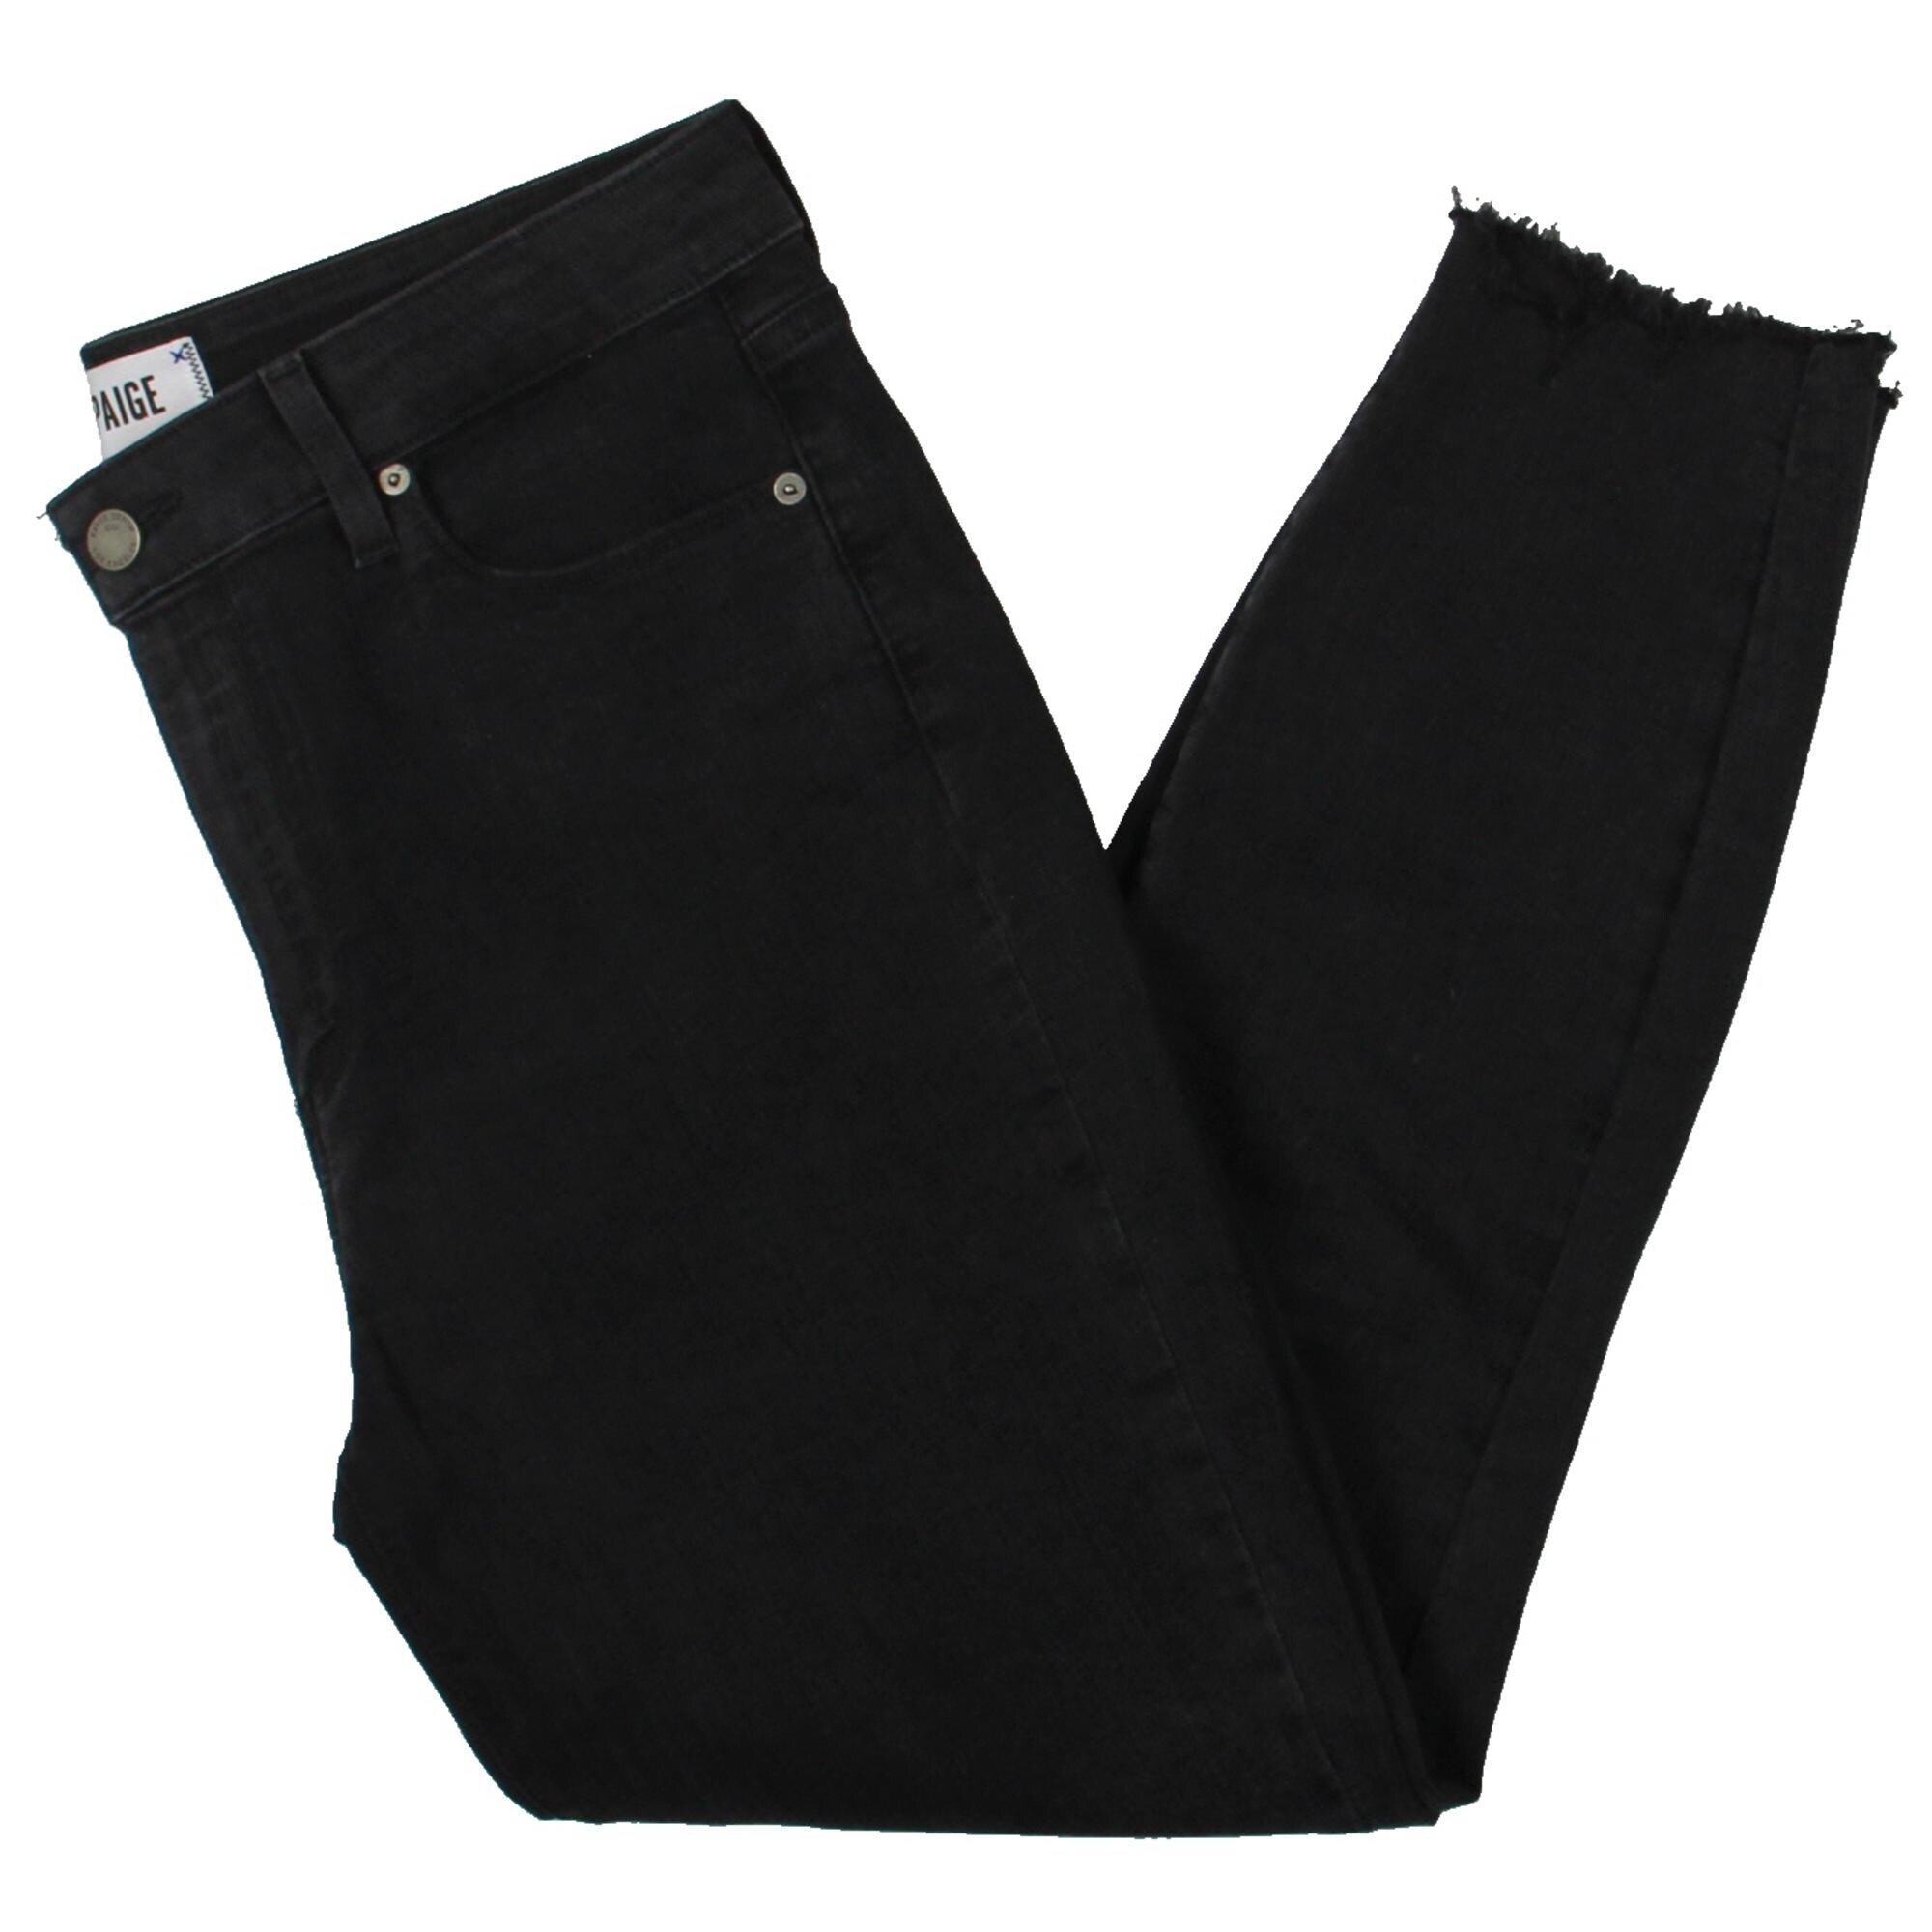 black cropped jeans womens